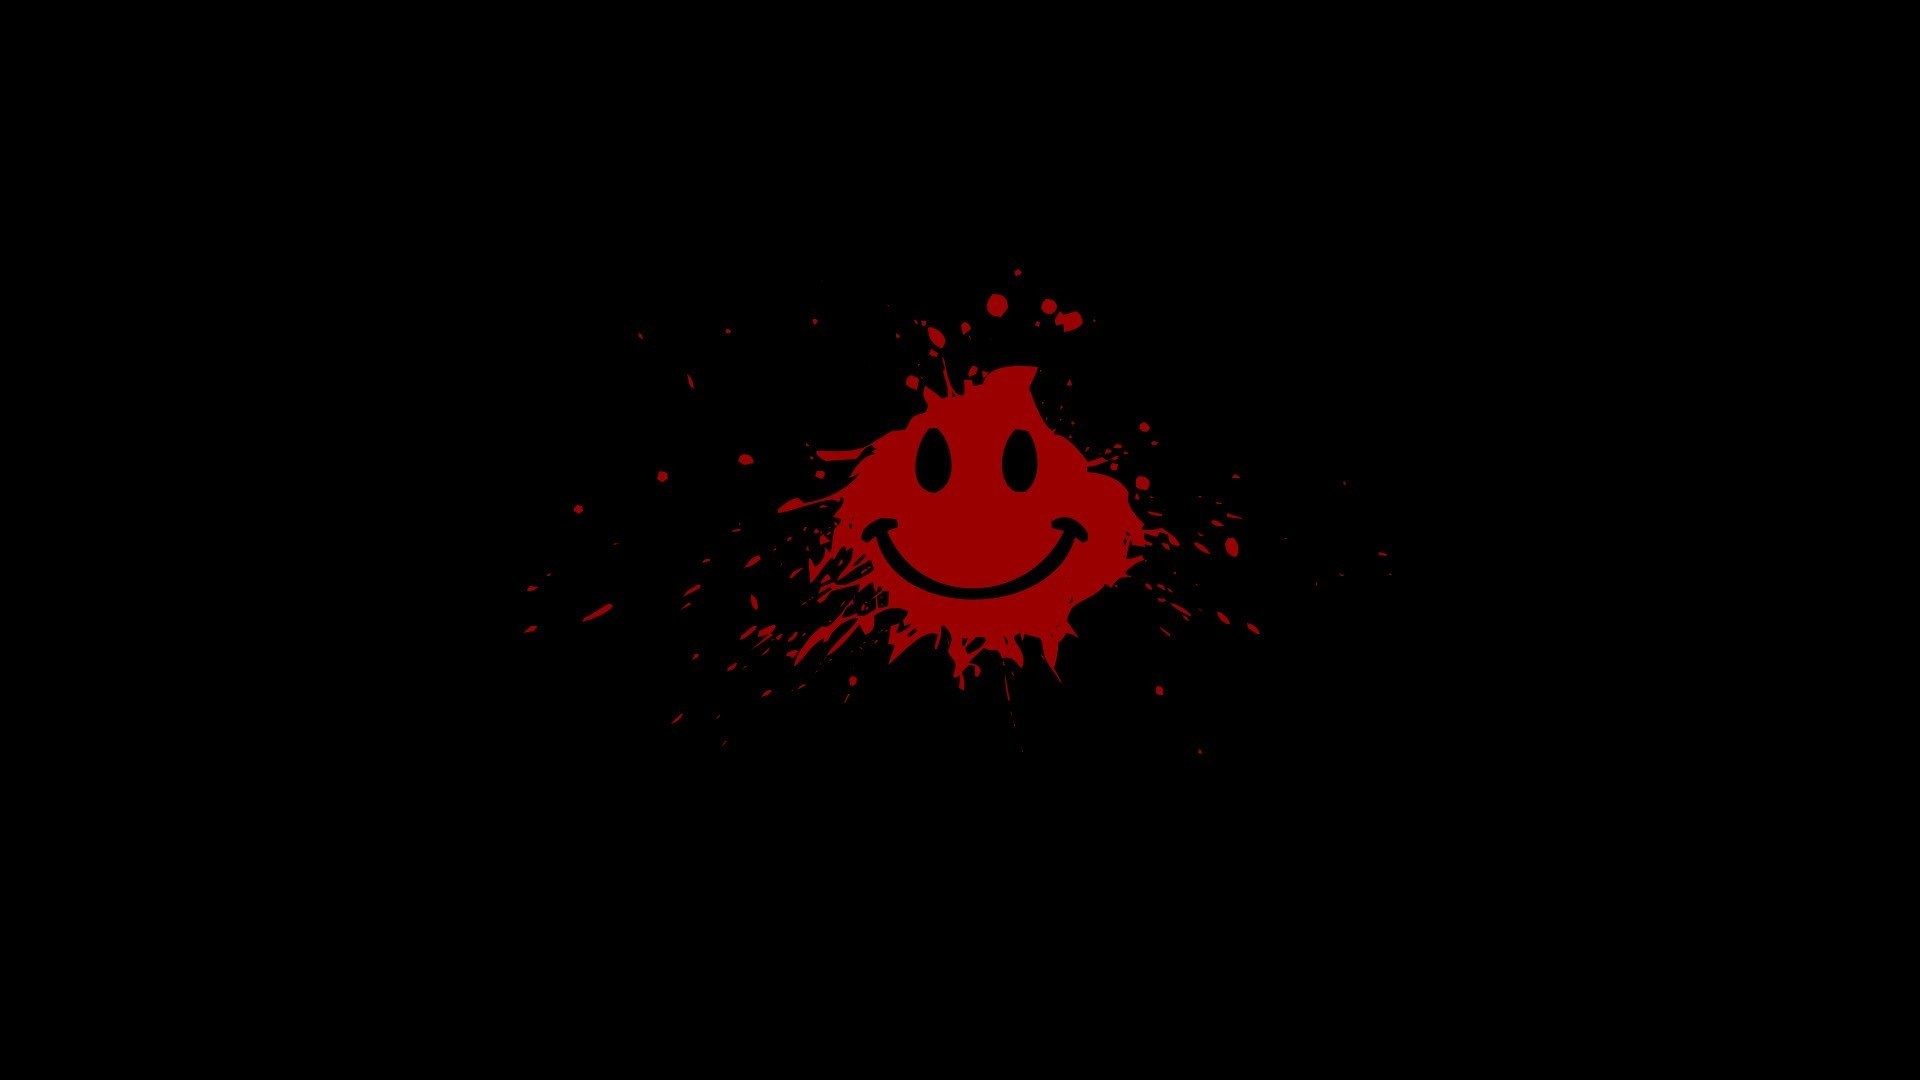 1920x1080 splatters, high resolution, best humor images, smiley,hd abstract wallpapers  free images, face, smiley, humor background images,watchmen Wallpaper HD